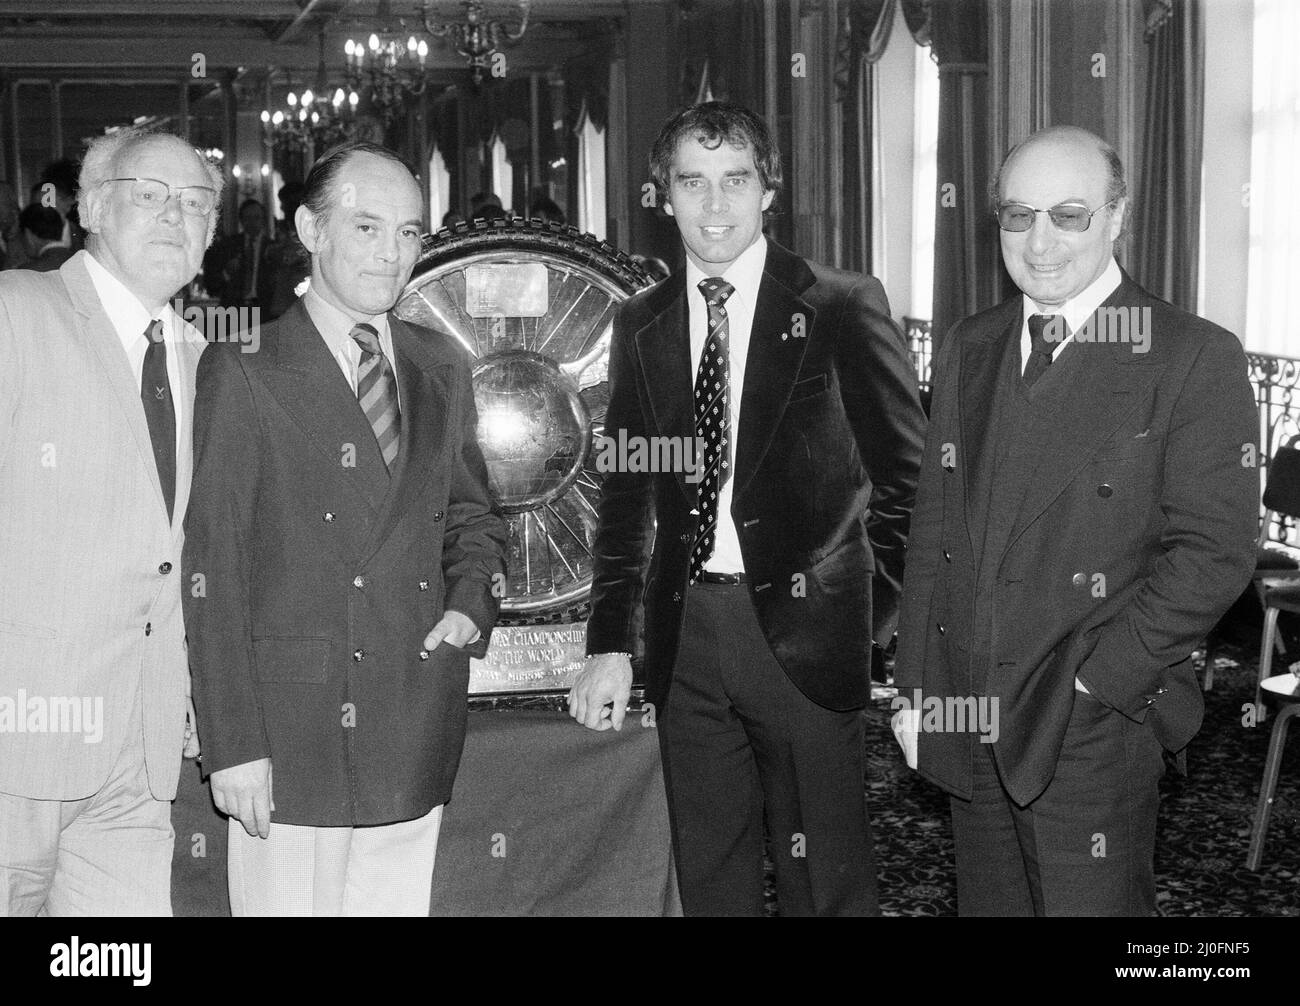 Ivan Mauger MBE, Speedway Five Times World Champion, is presented with the Sunday Mirror Winged Wheel Trophy, by Tony Smith, 2nd left, Sports Editor of the Sunday Mirror, 11th April 1978. Stock Photo